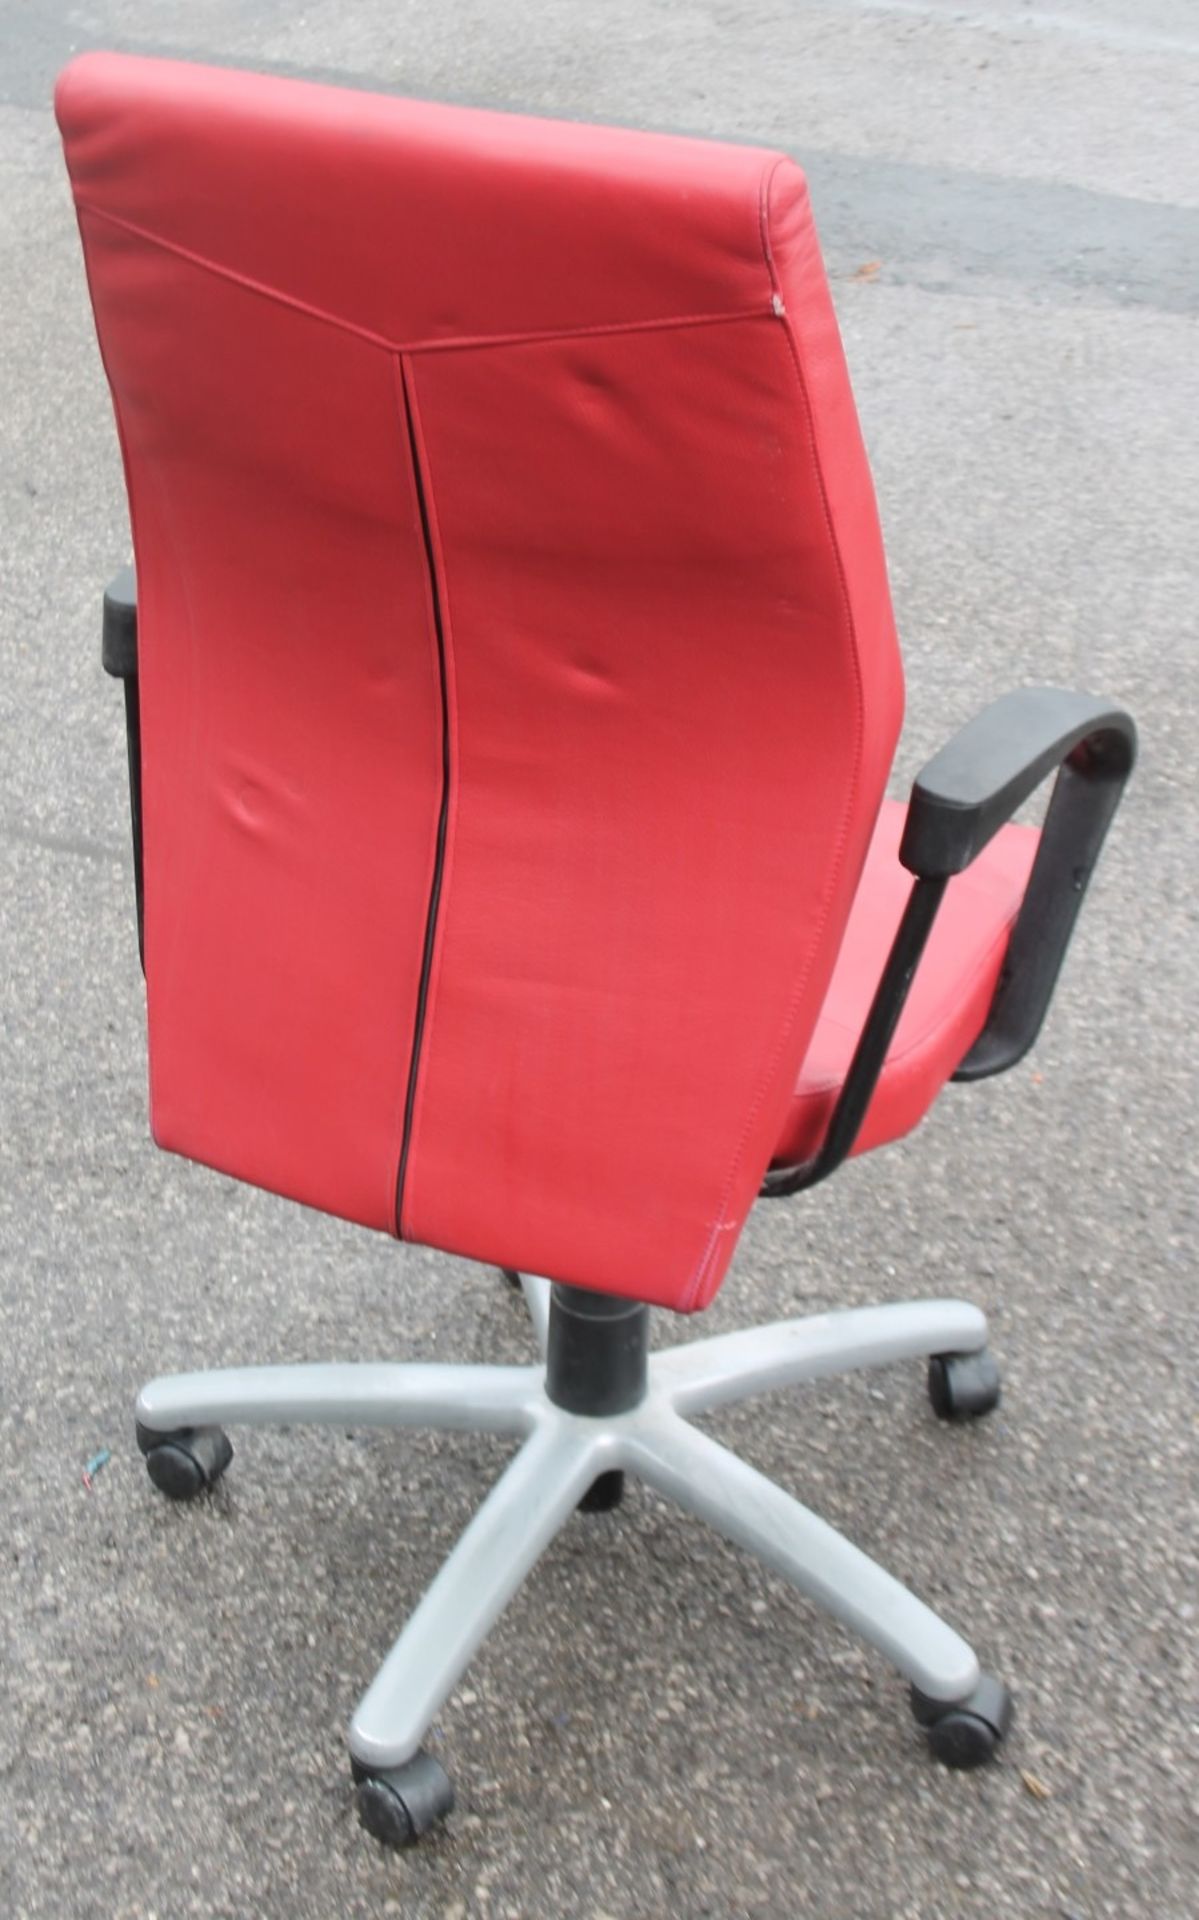 1 x VERCO Branded Gas Lift Swivel Chair Upholstered In A Red Faux Leather - Removed From An - Image 2 of 5